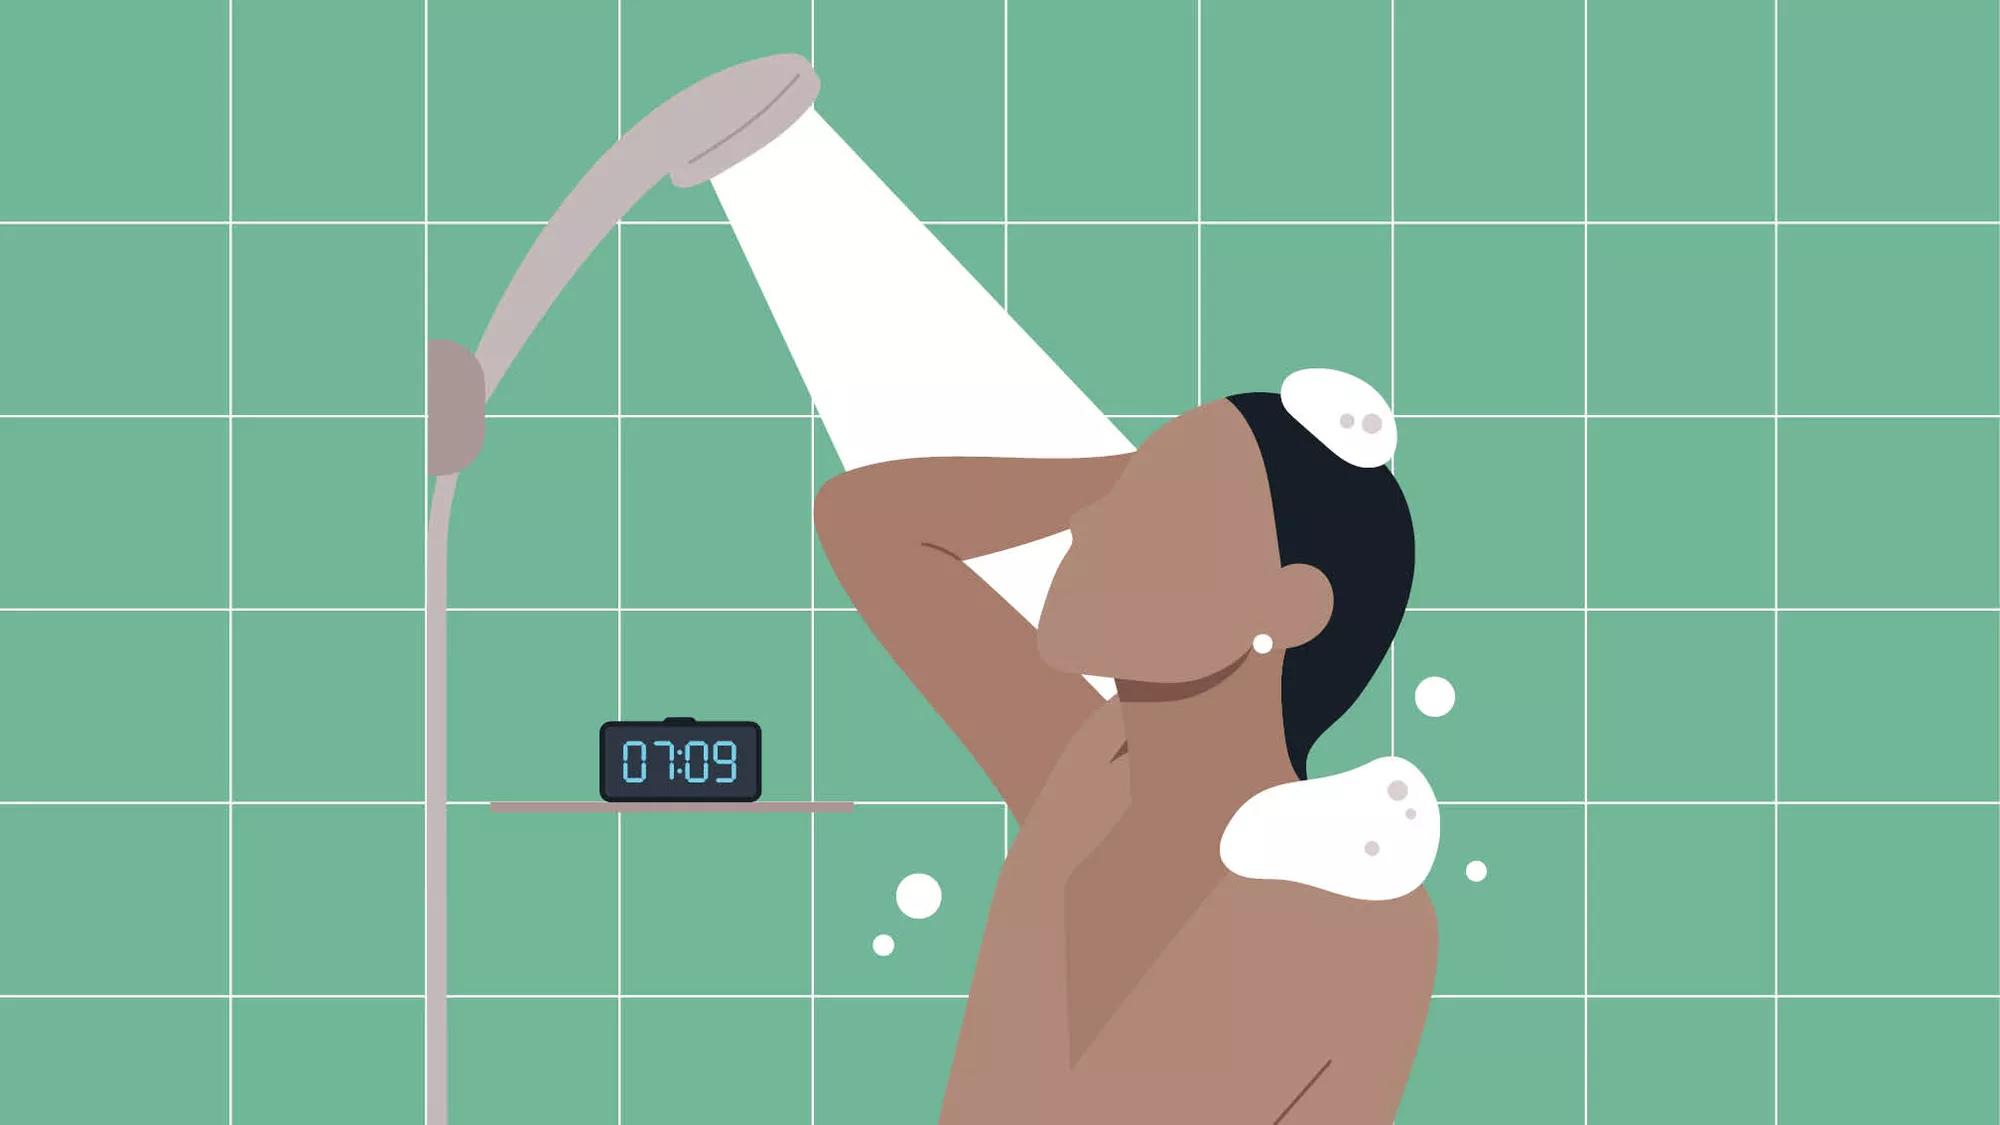 Morning or night? We finally know what's the right time to shower!